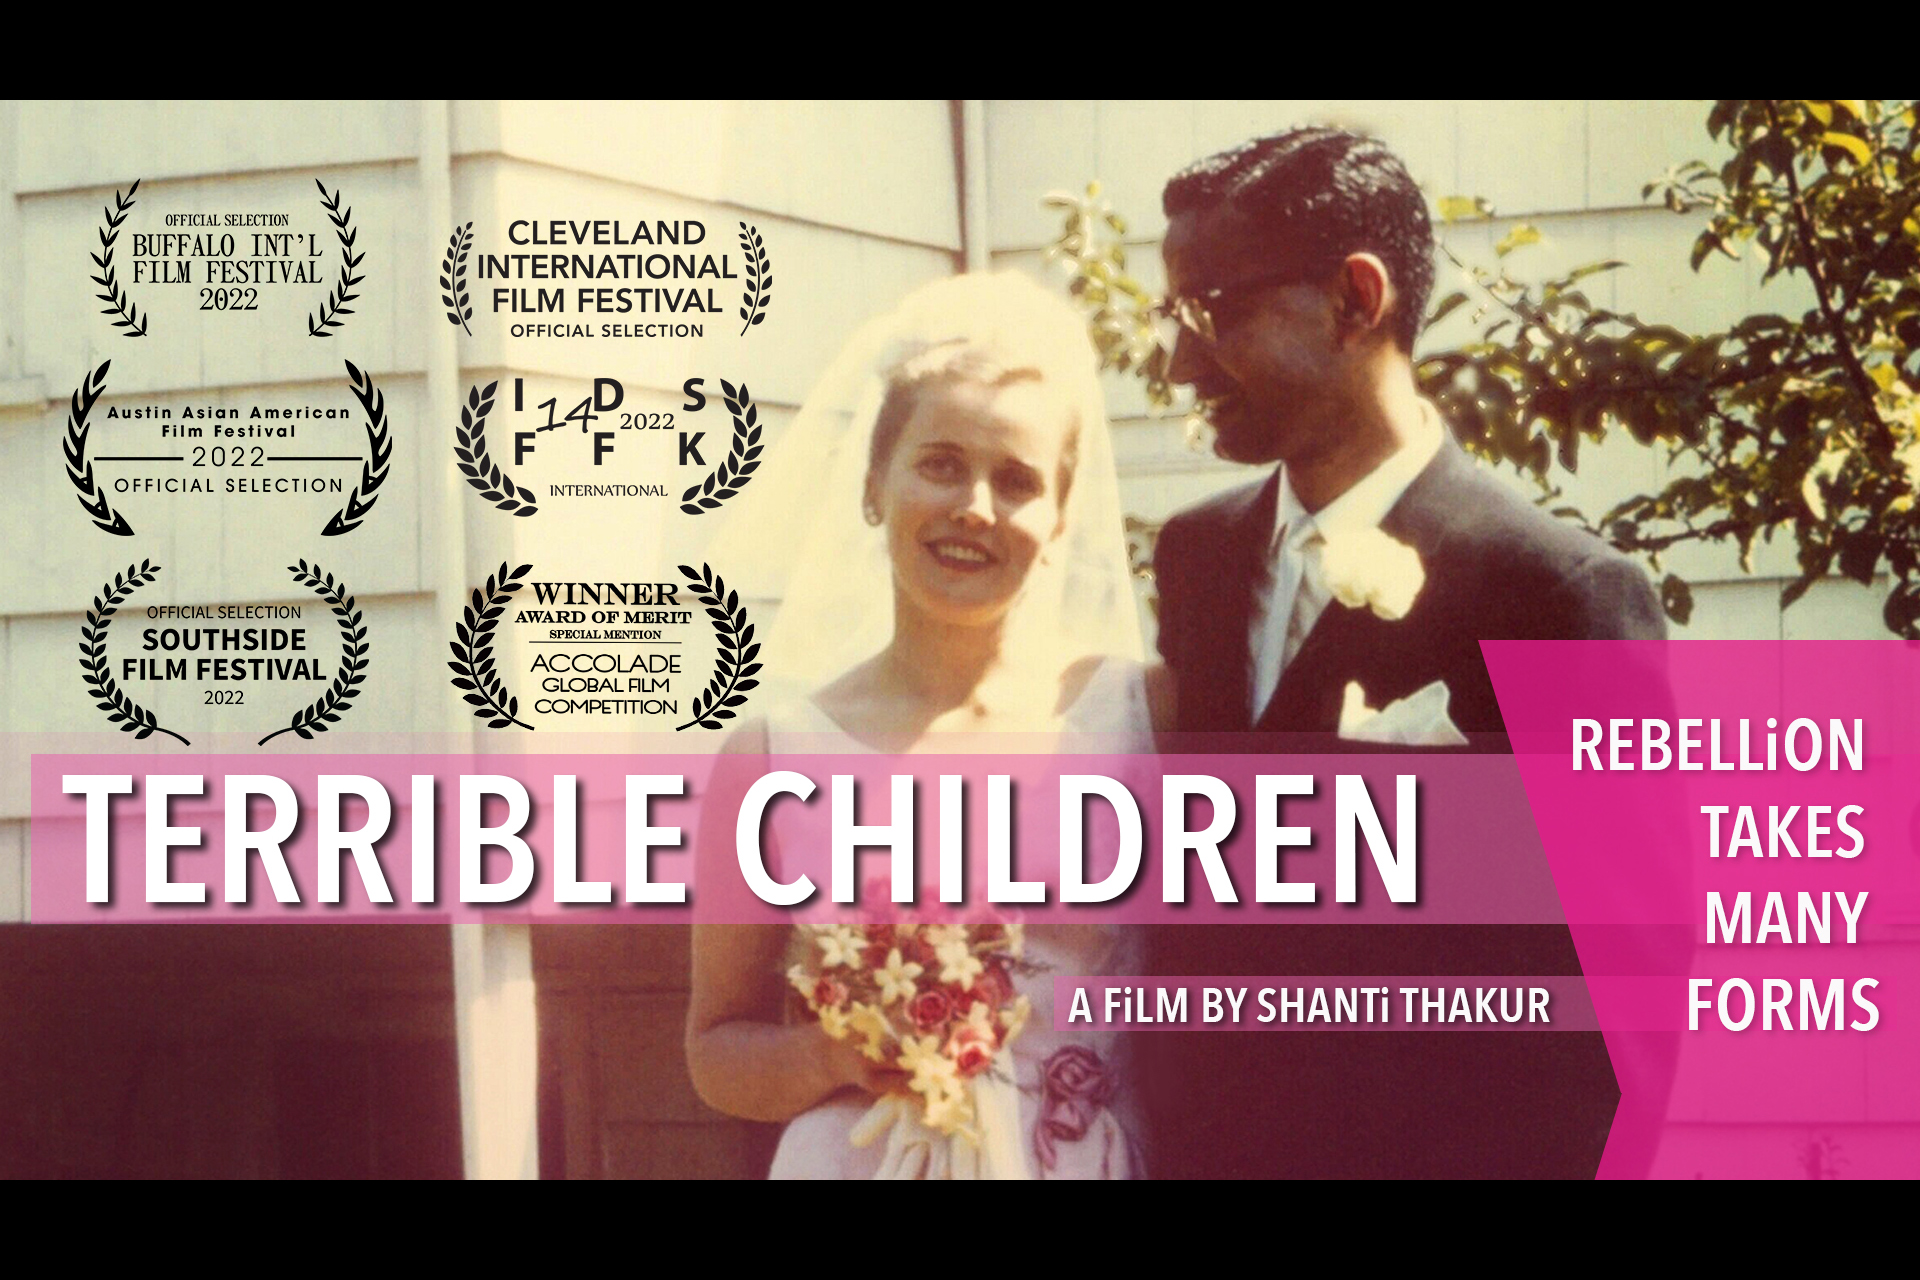 A poster promoting Terrible Children, with actors dressed in wedding garb.